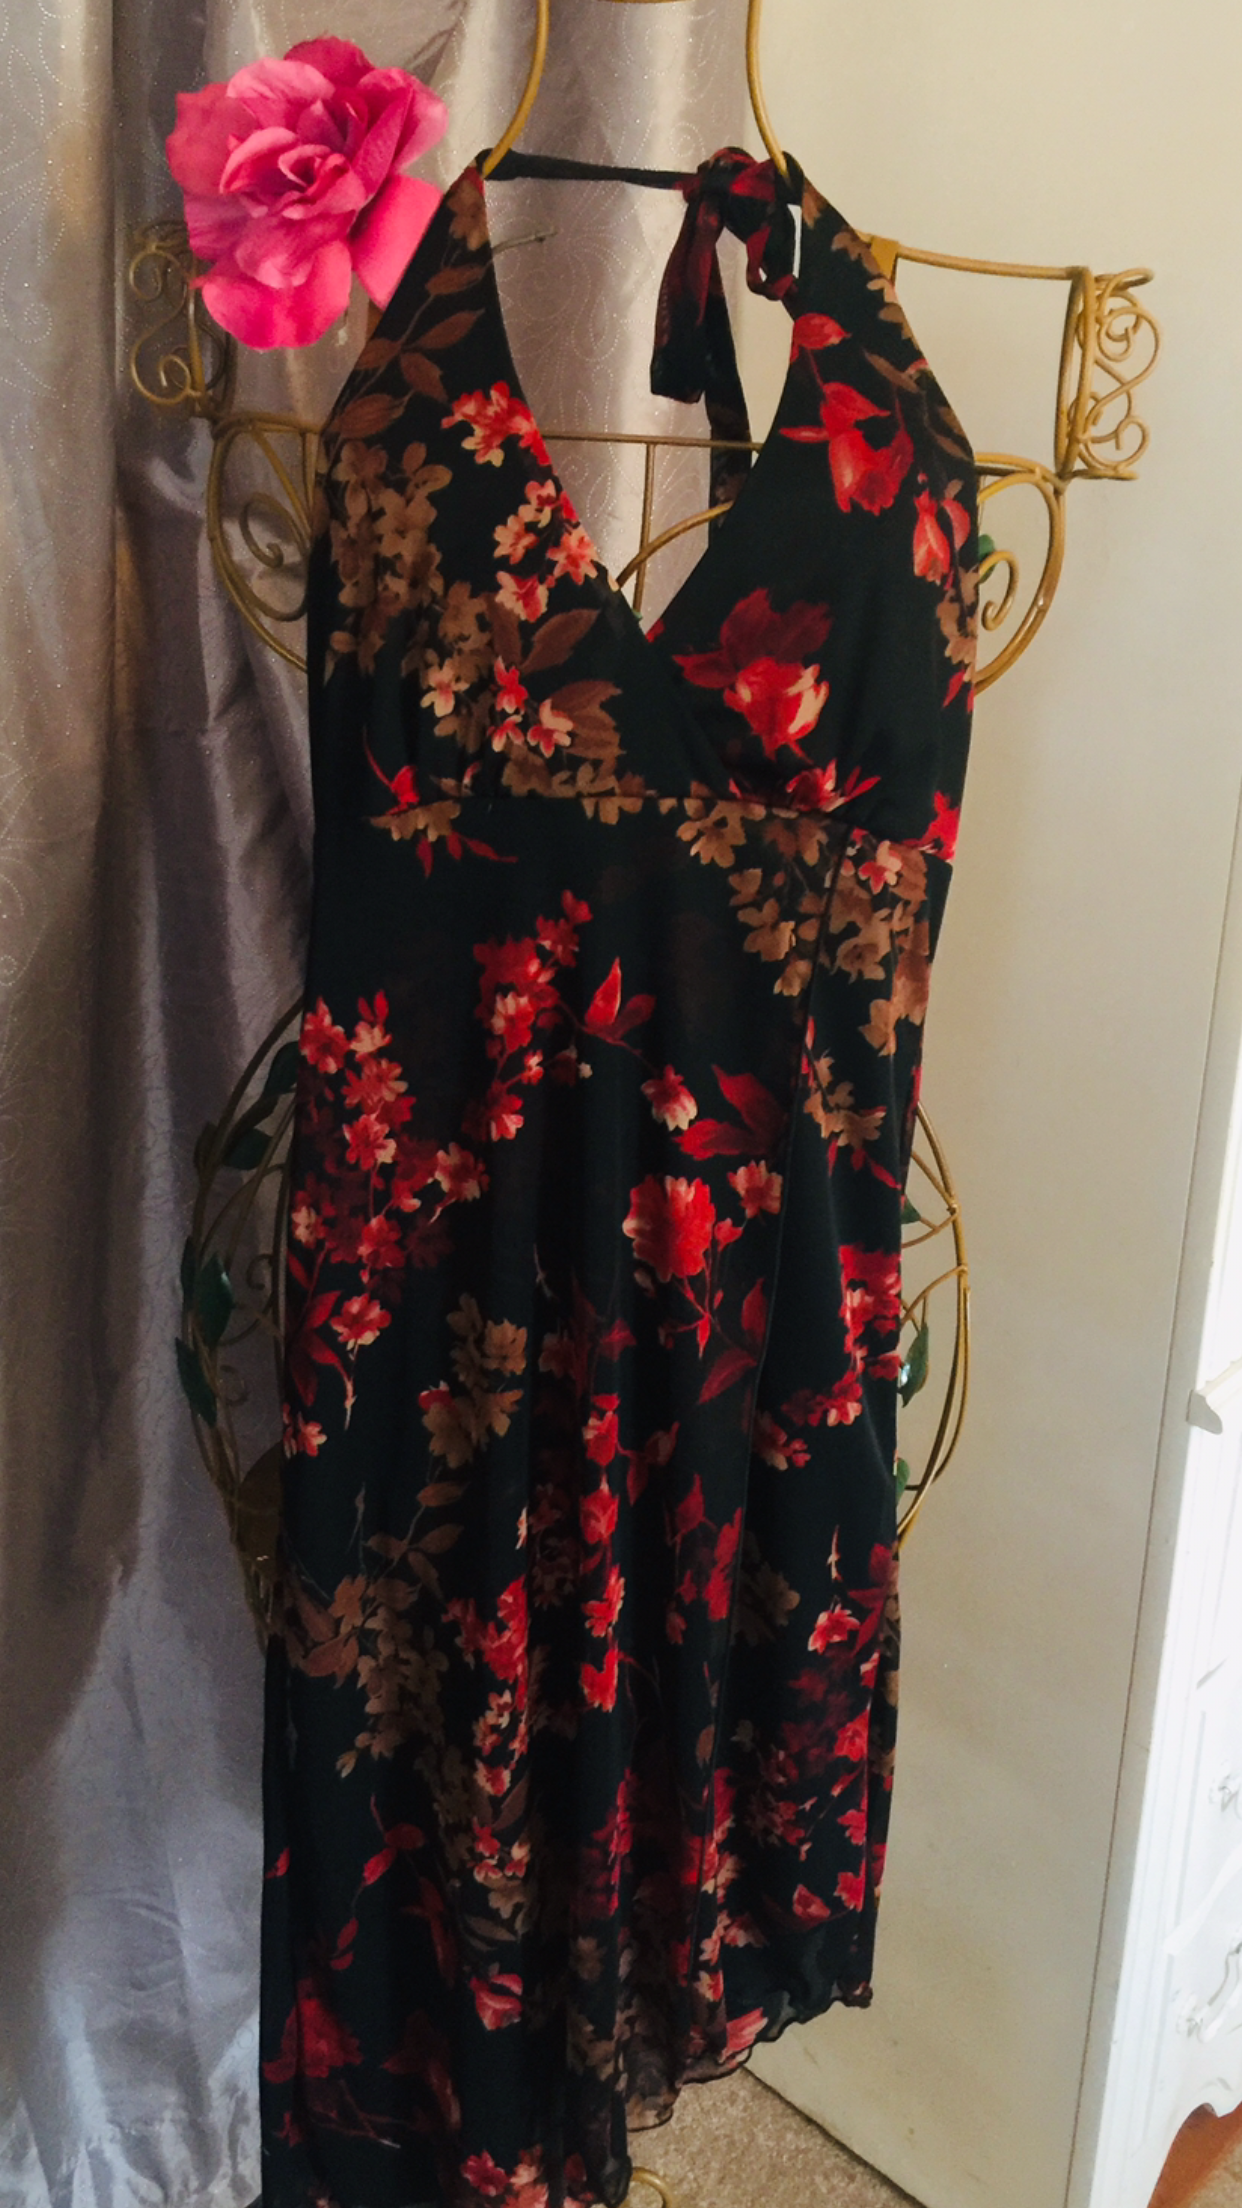 Misses Halter SeXY STRETCH designer dress black with red flowers New backless slip on high low size small